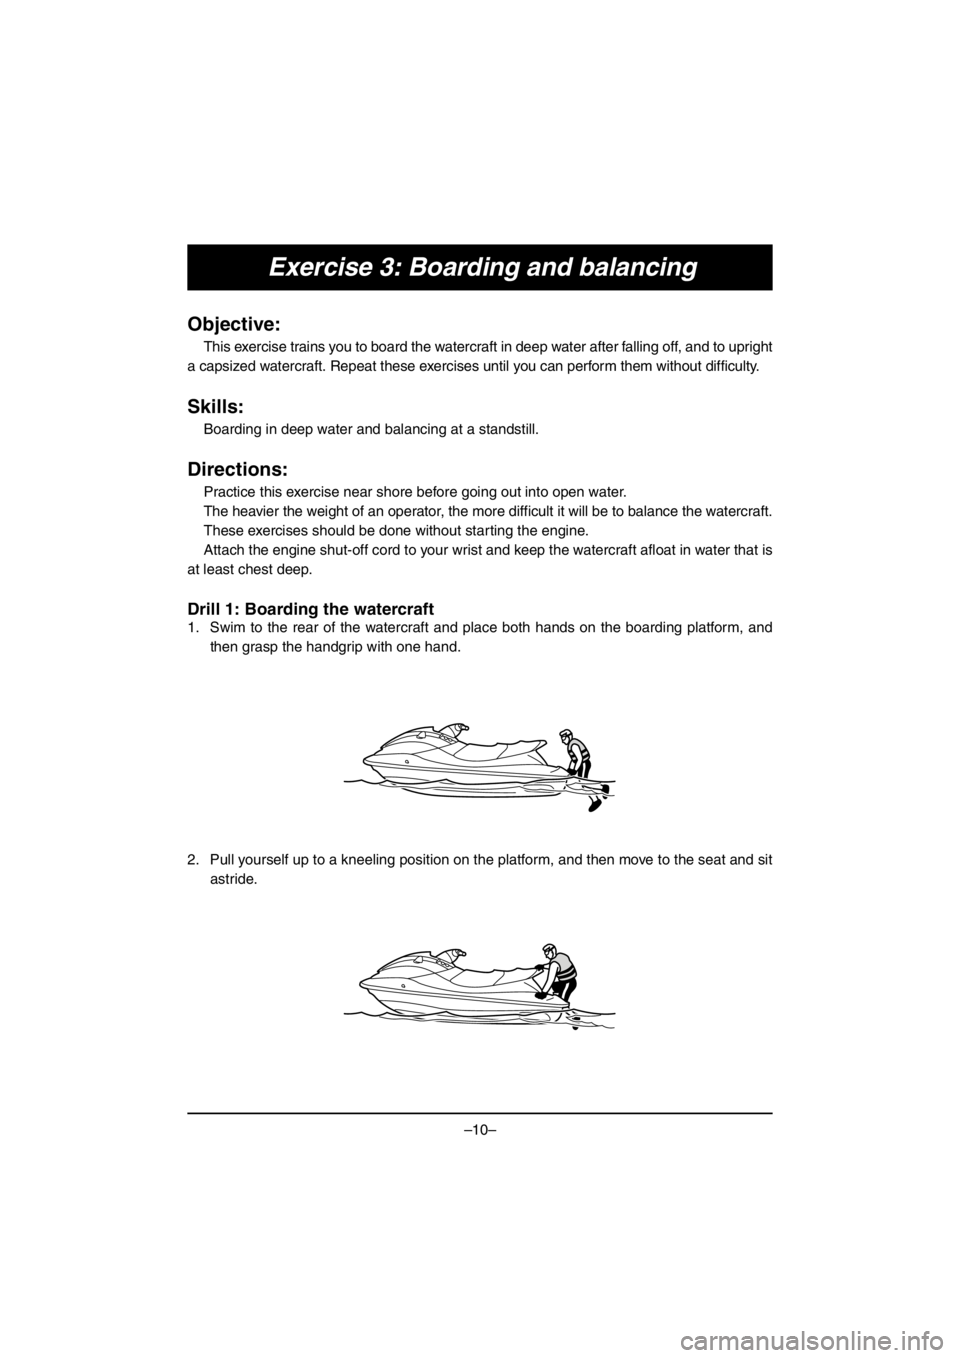 YAMAHA EX SPORT 2017  Manuale duso (in Italian) –10–
Exercise 3: Boarding and balancing
Objective:
This exercise trains you to board the watercraft in deep water after falling off, and to upright
a capsized watercraft. Repeat these exercises un